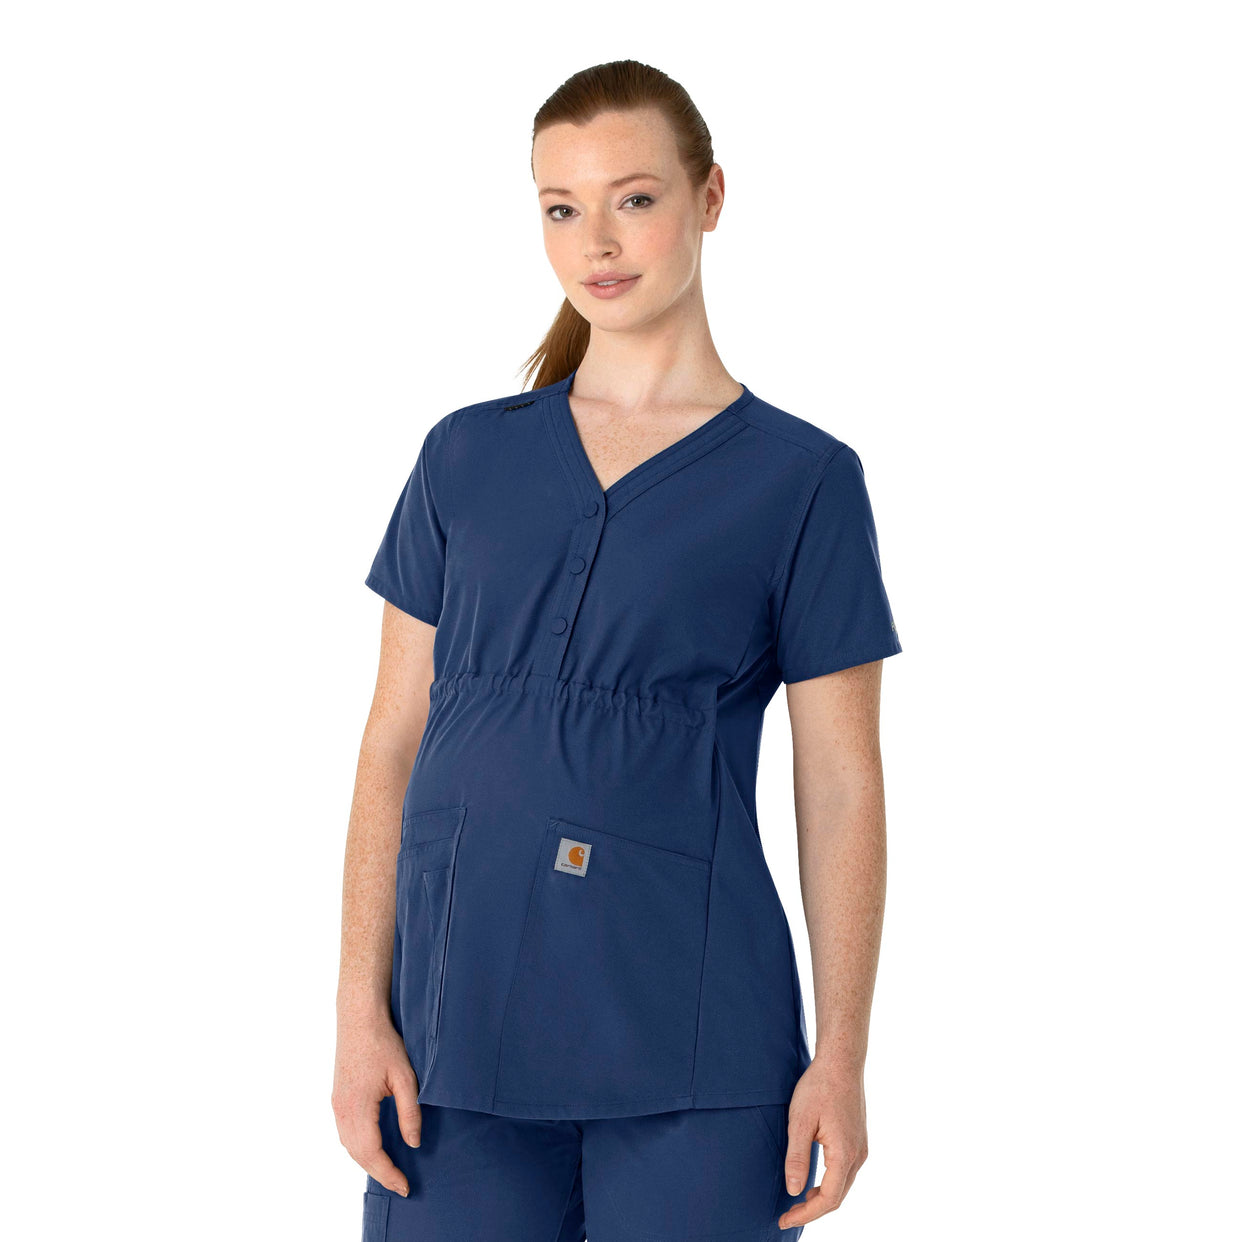 Force Essentials Women's Henley Maternity Scrub Top Navy side view